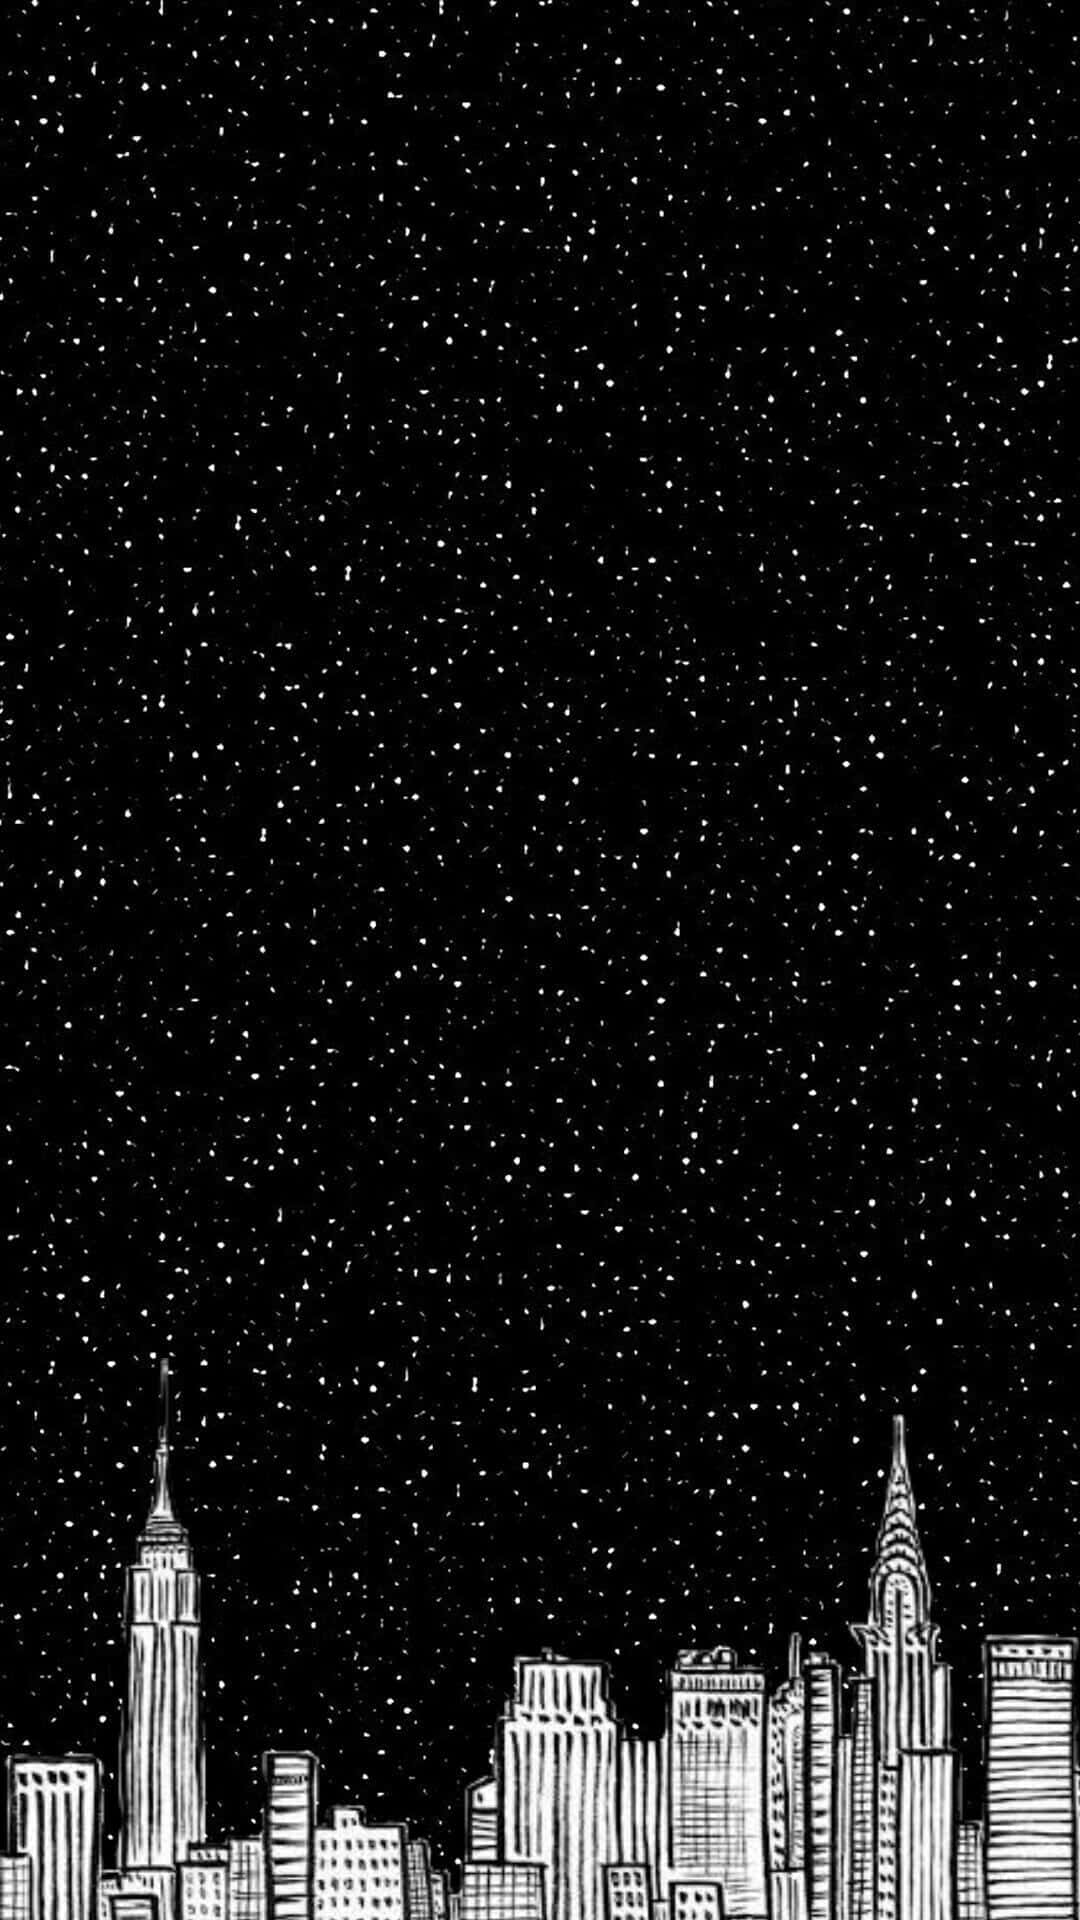 Abstract Black and White Star Design Wallpaper